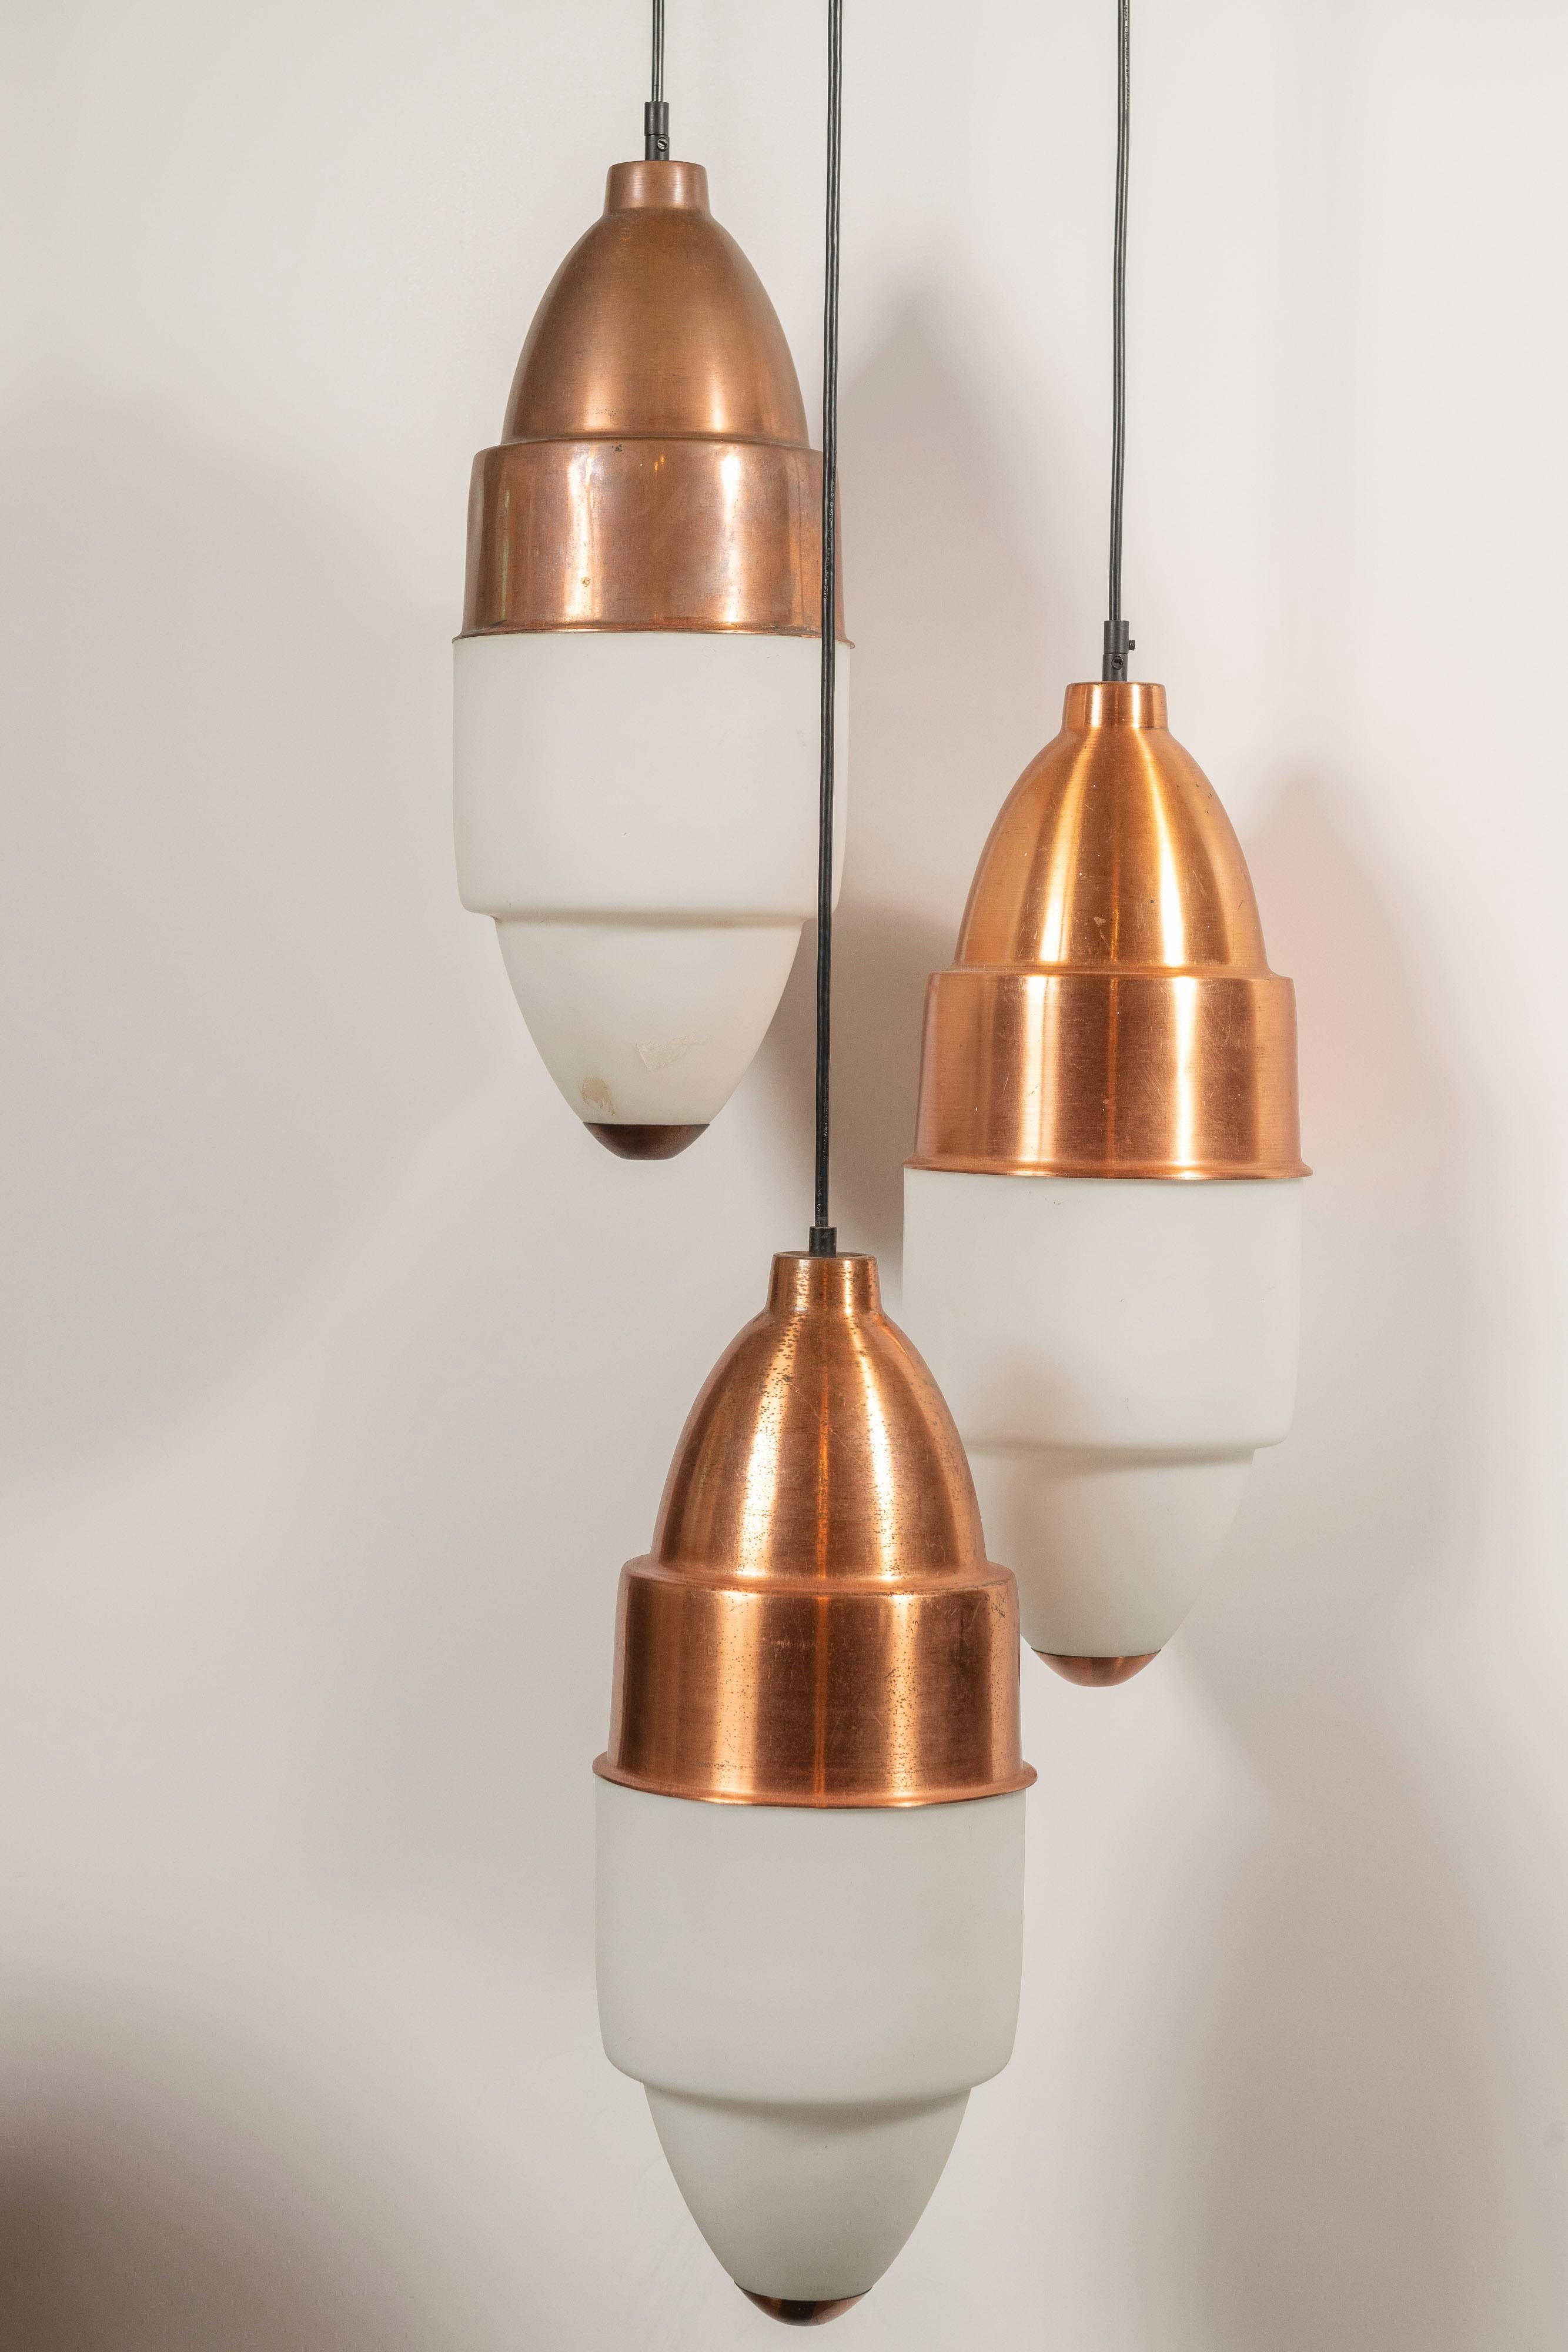 Three rare, mid-century copper and opaline glass pendants designed by Stilnovo, made in Italy. Presently wired with a plug, these lights can be hung in a cluster or individually and are perfect to create interest above a bar, kitchen island, dining